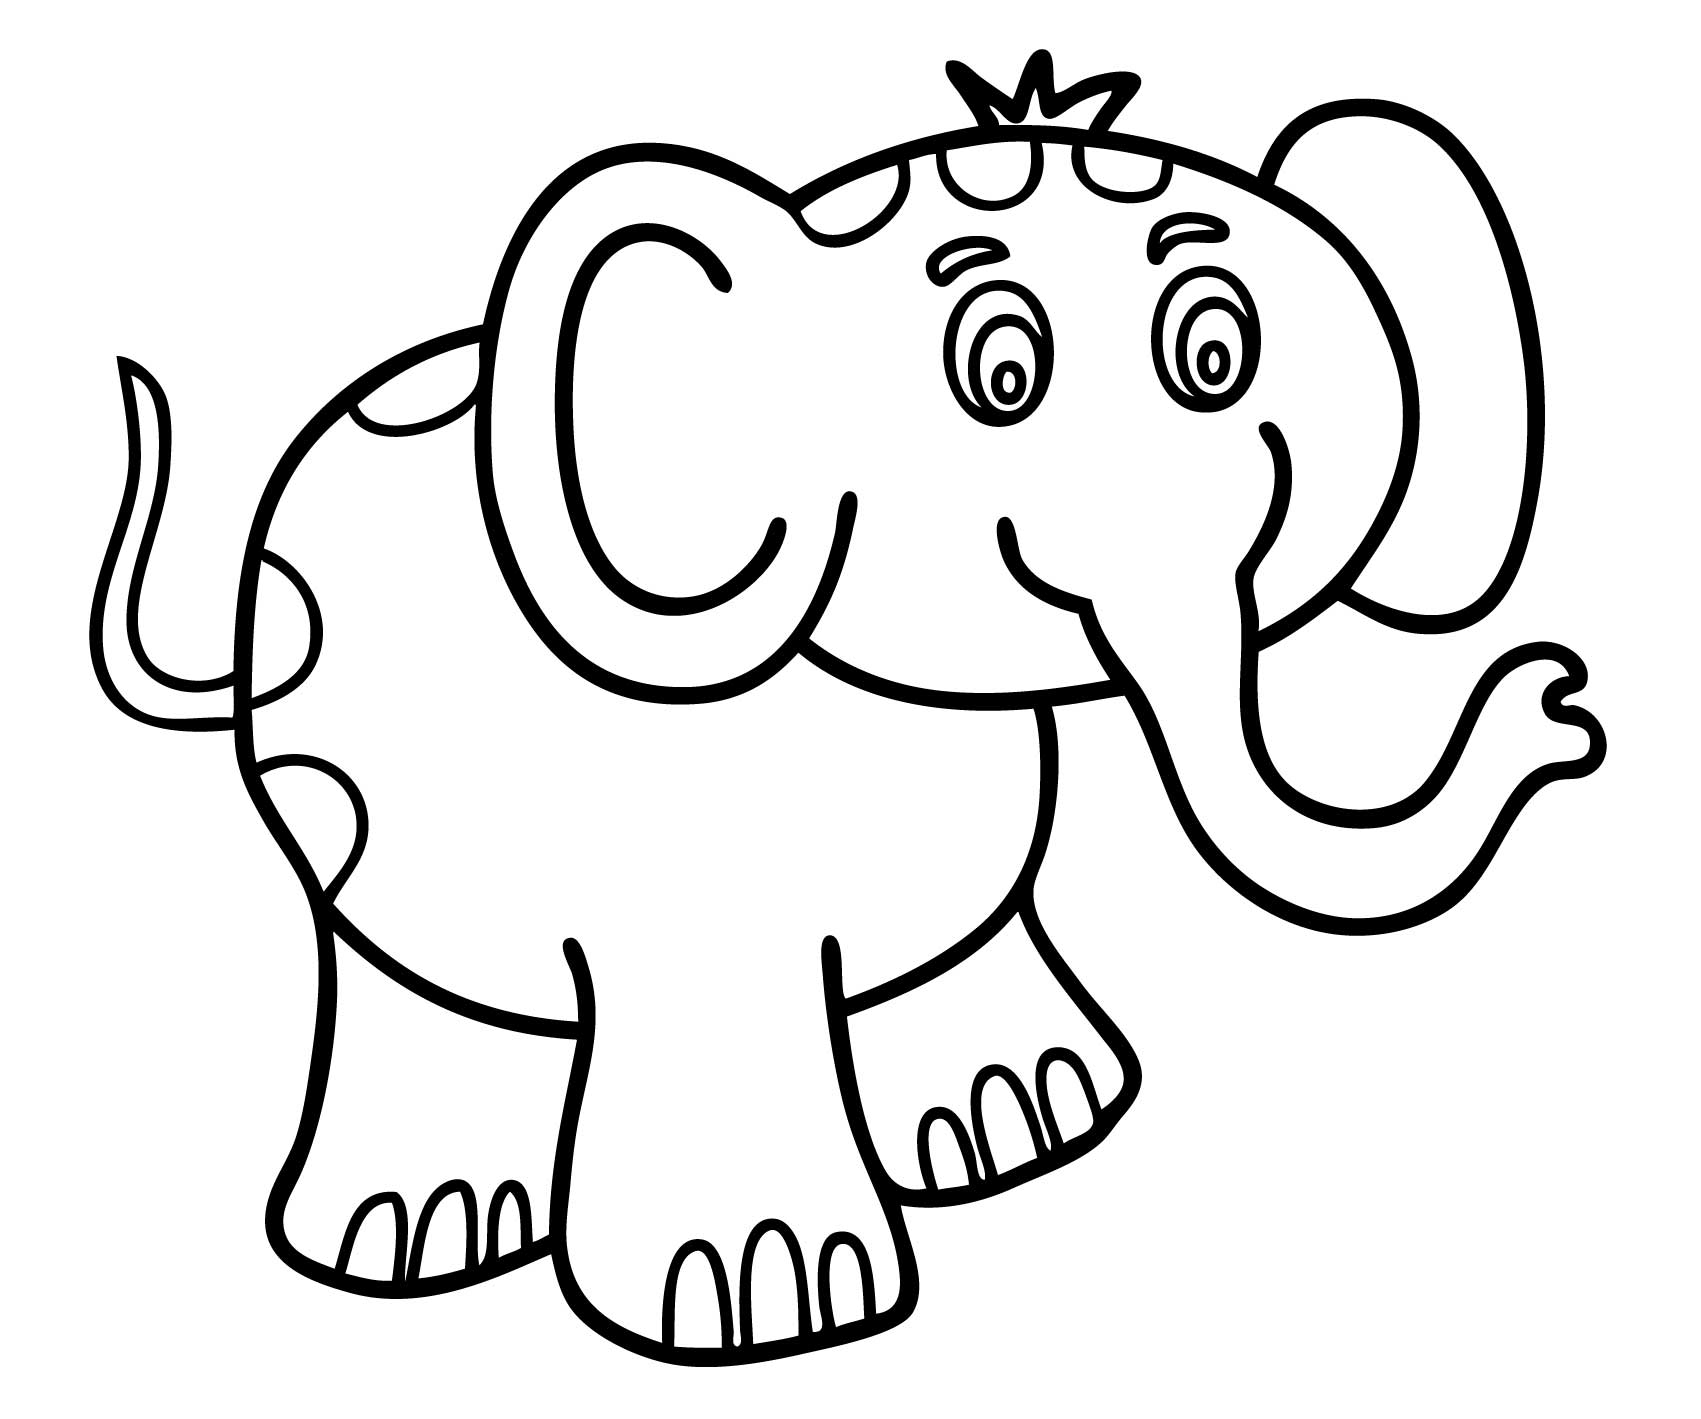 Easy Coloring Pages For Kids at Free printable